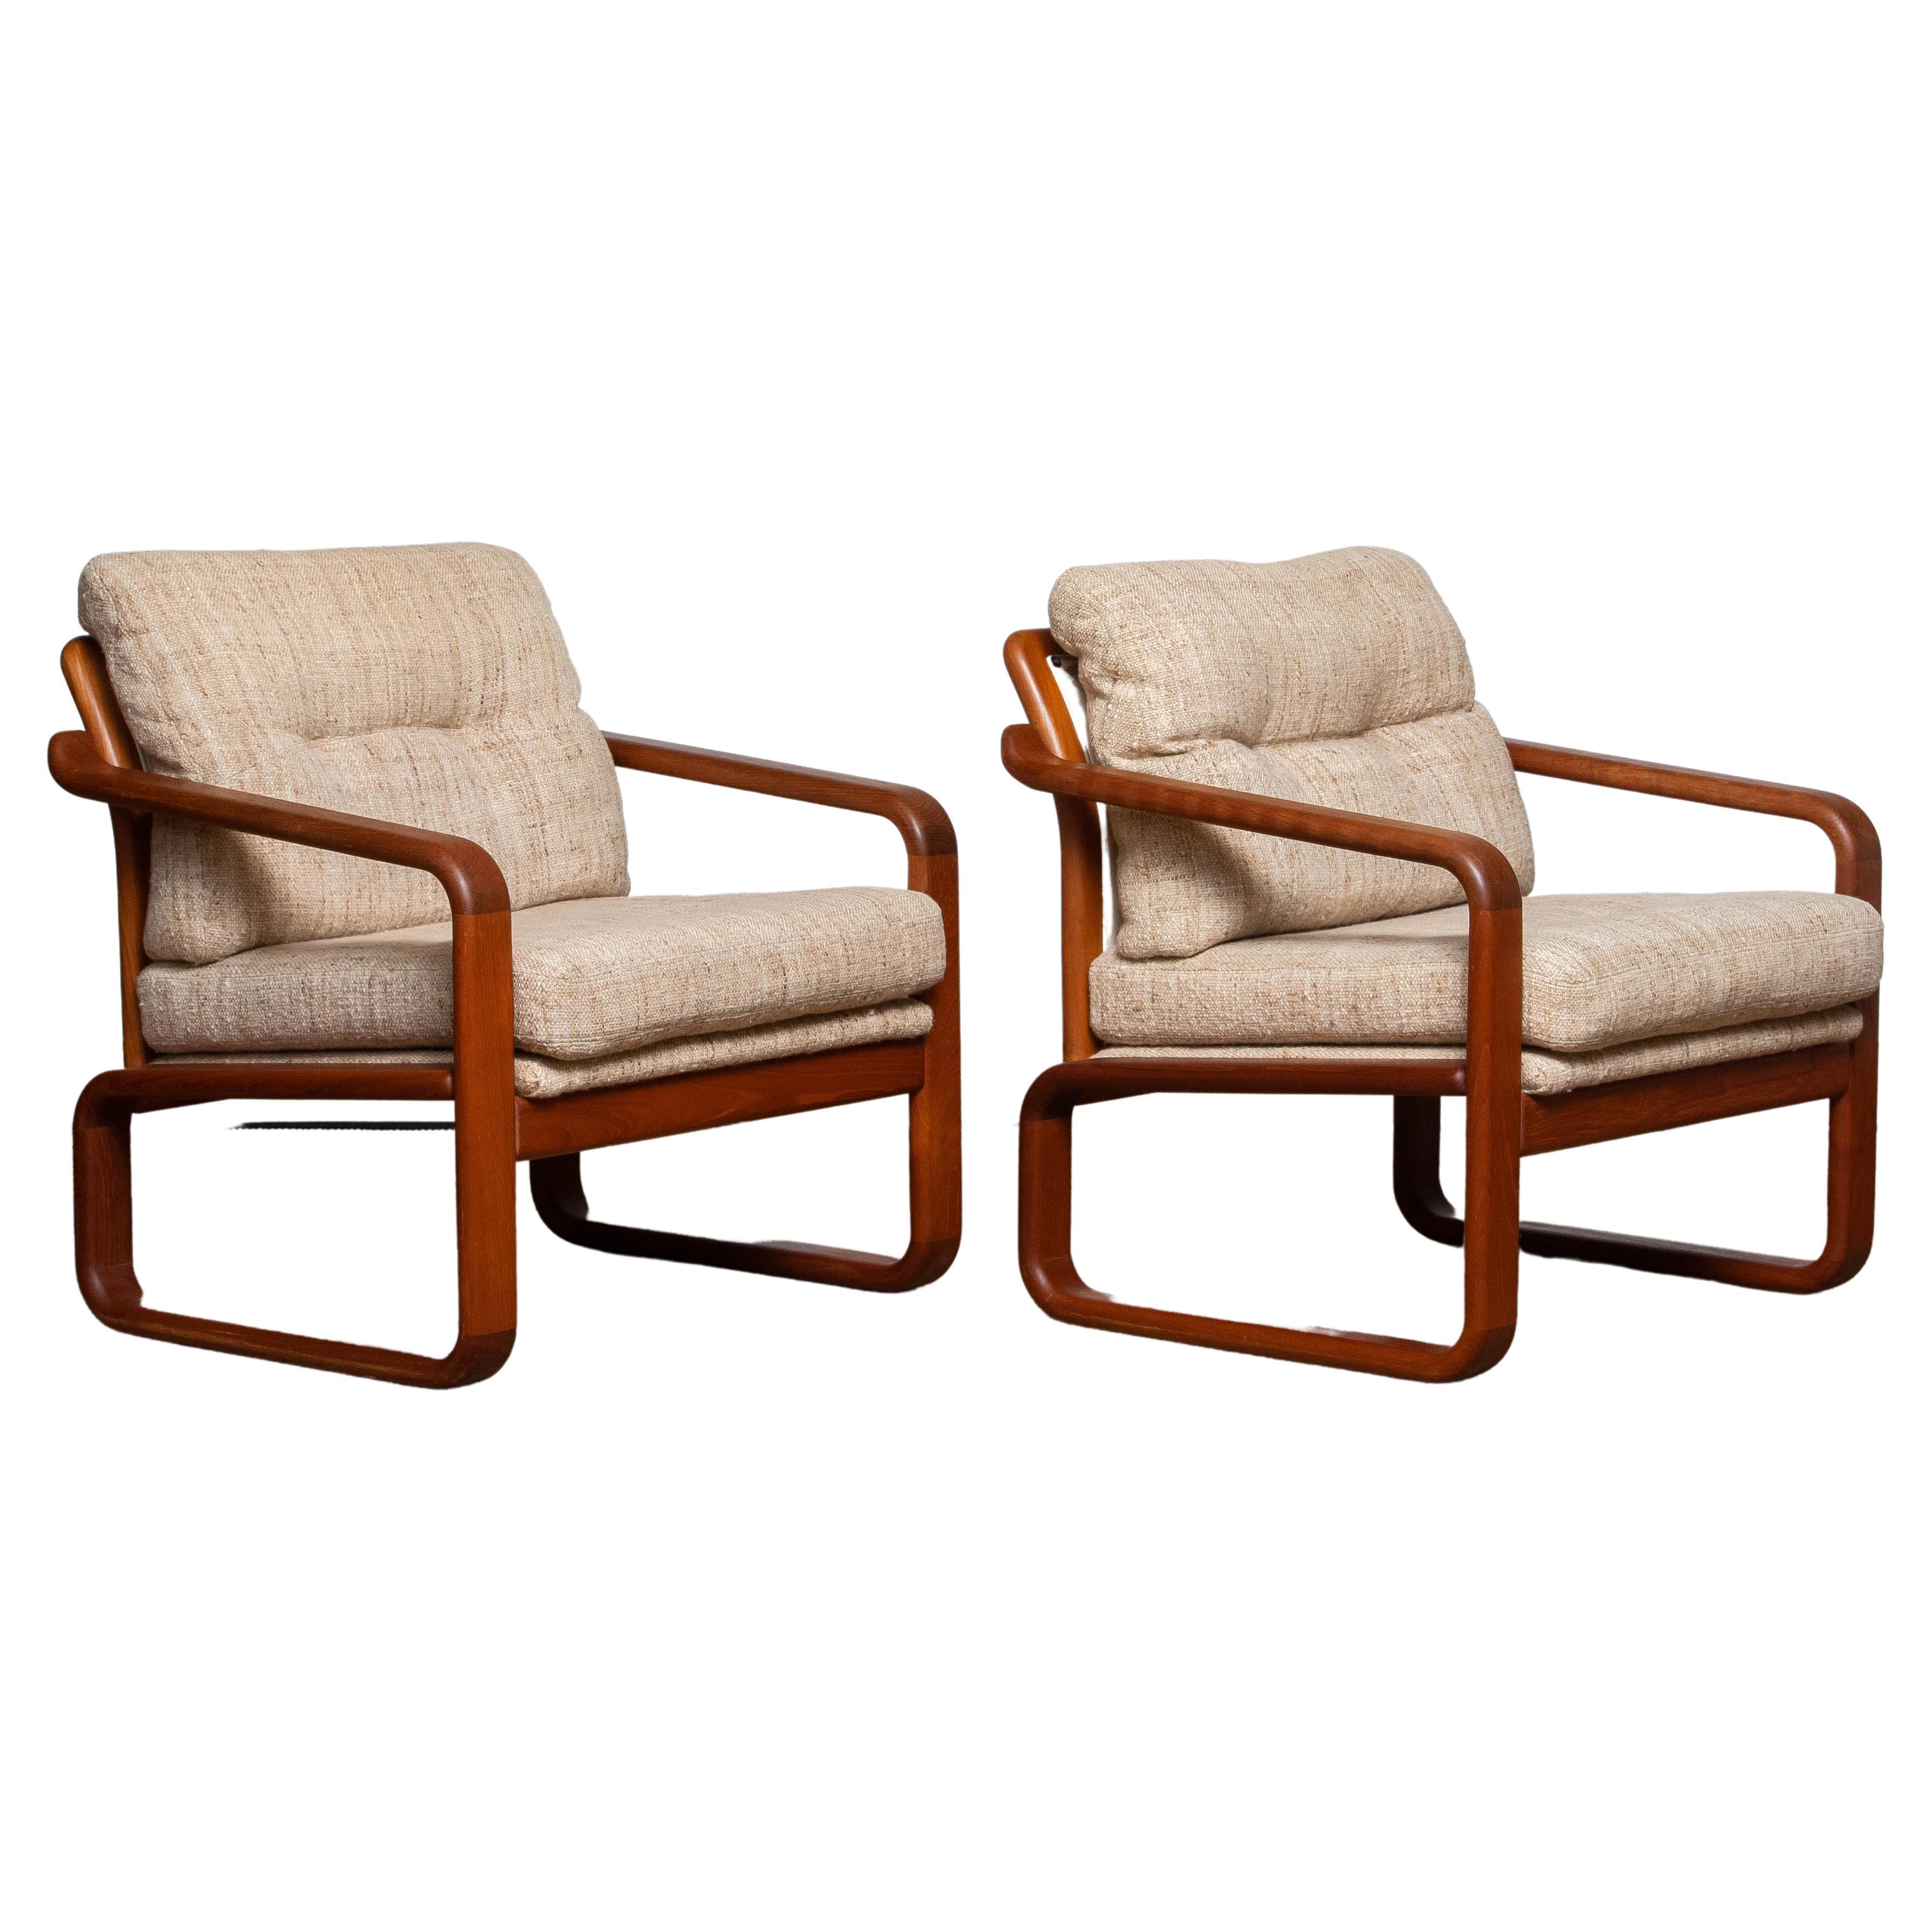 1980's Pair Teak with Wool Cushions Lounge / Easy Chair by HS Design, Denmark For Sale